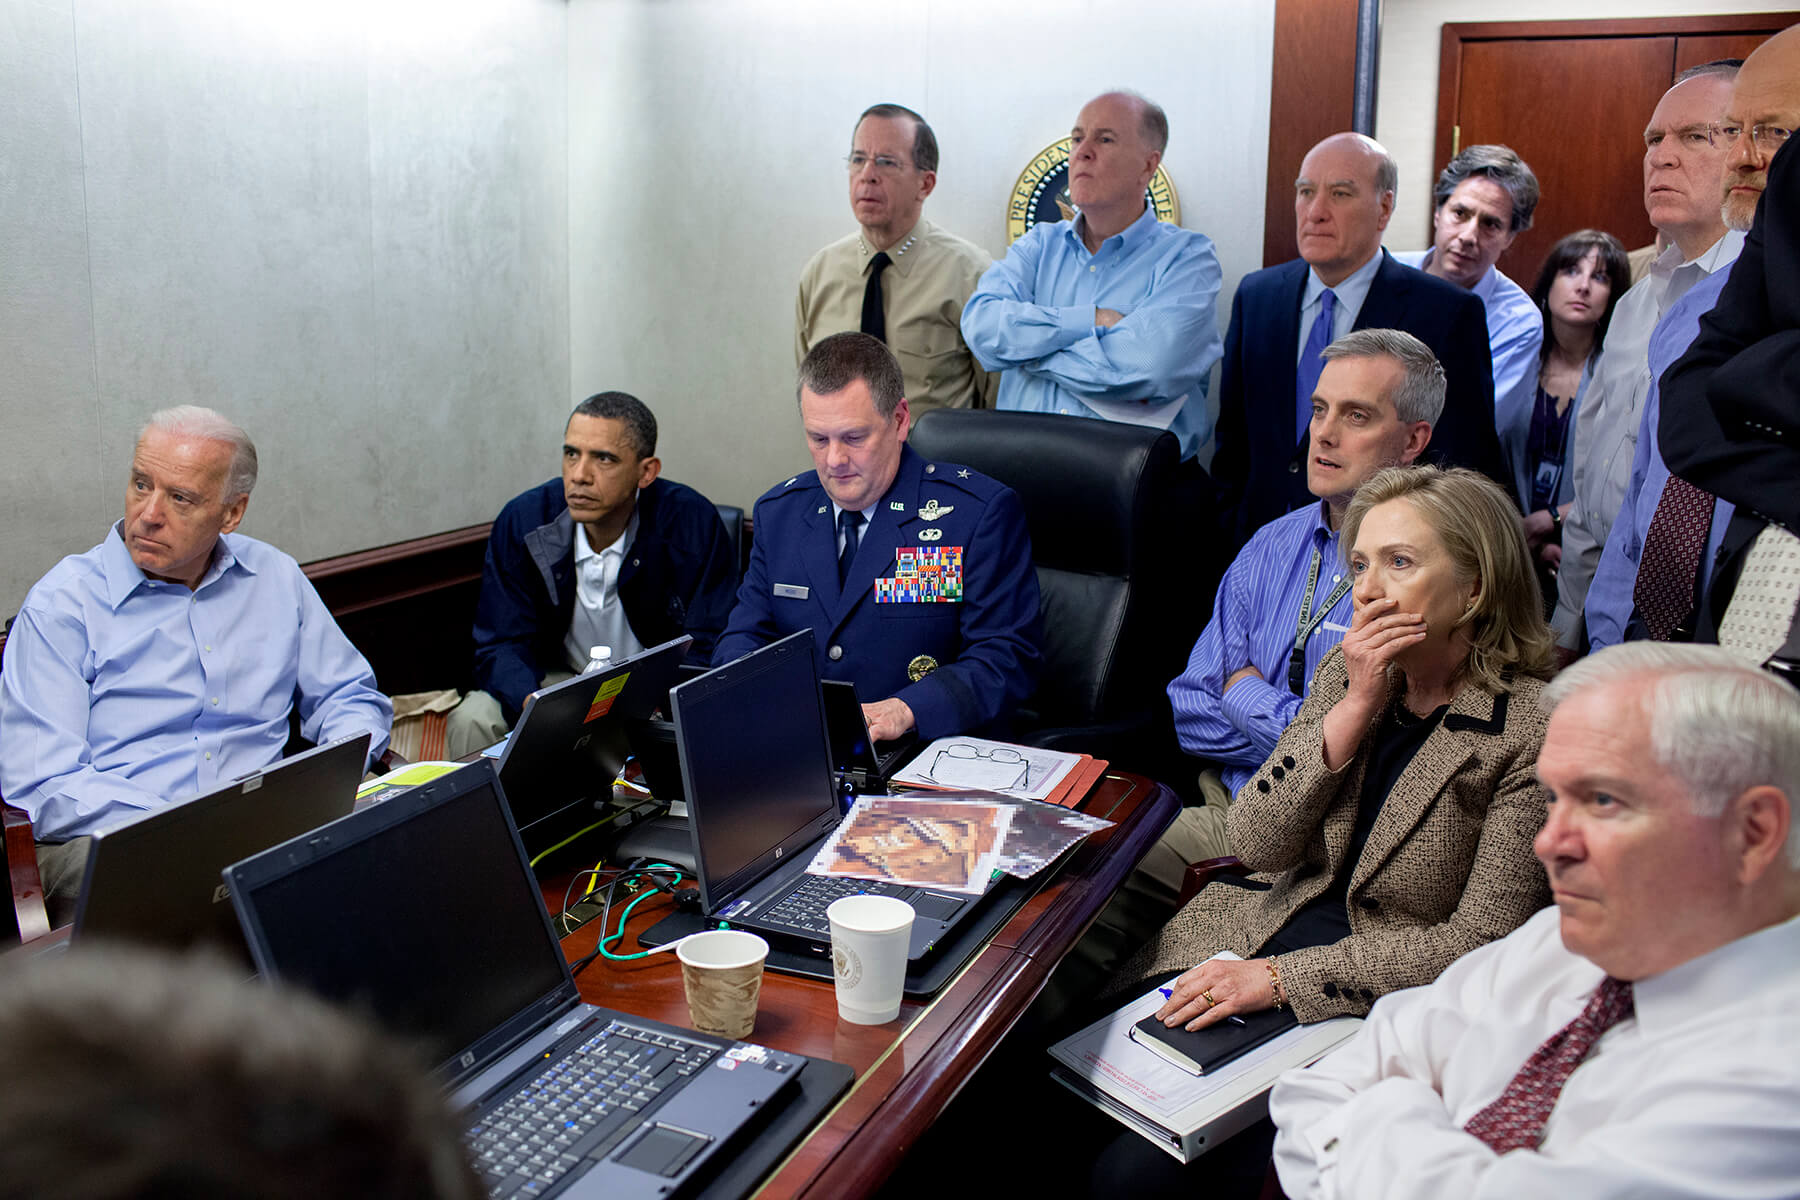 President Barack Obama and Vice President Joe Biden, along with members of the national security team, receive an update on the mission against Osama bin Laden in the Situation Room of the White House, May 1, 2011. Seated, from left: Brigadier General Marshall B. Webb, assistant commanding general, JSOC; Deputy National Security Advisor Denis McDonough; Secretary of State Hillary Rodham Clinton; and Secretary of Defense Robert Gates. Standing, from left: Admiral Mike Mullen, chairman of the Joint Chiefs; National Security Advisor Tom Donilon; Chief of Staff Bill Daley; Tony Blinken, national security advisor to the vice president; Audrey Tomason, director for counterterrorism; John Brennan, assistant to the president for homeland security and counterterrorism; and Director of National Intelligence James Clapper (out of frame). 